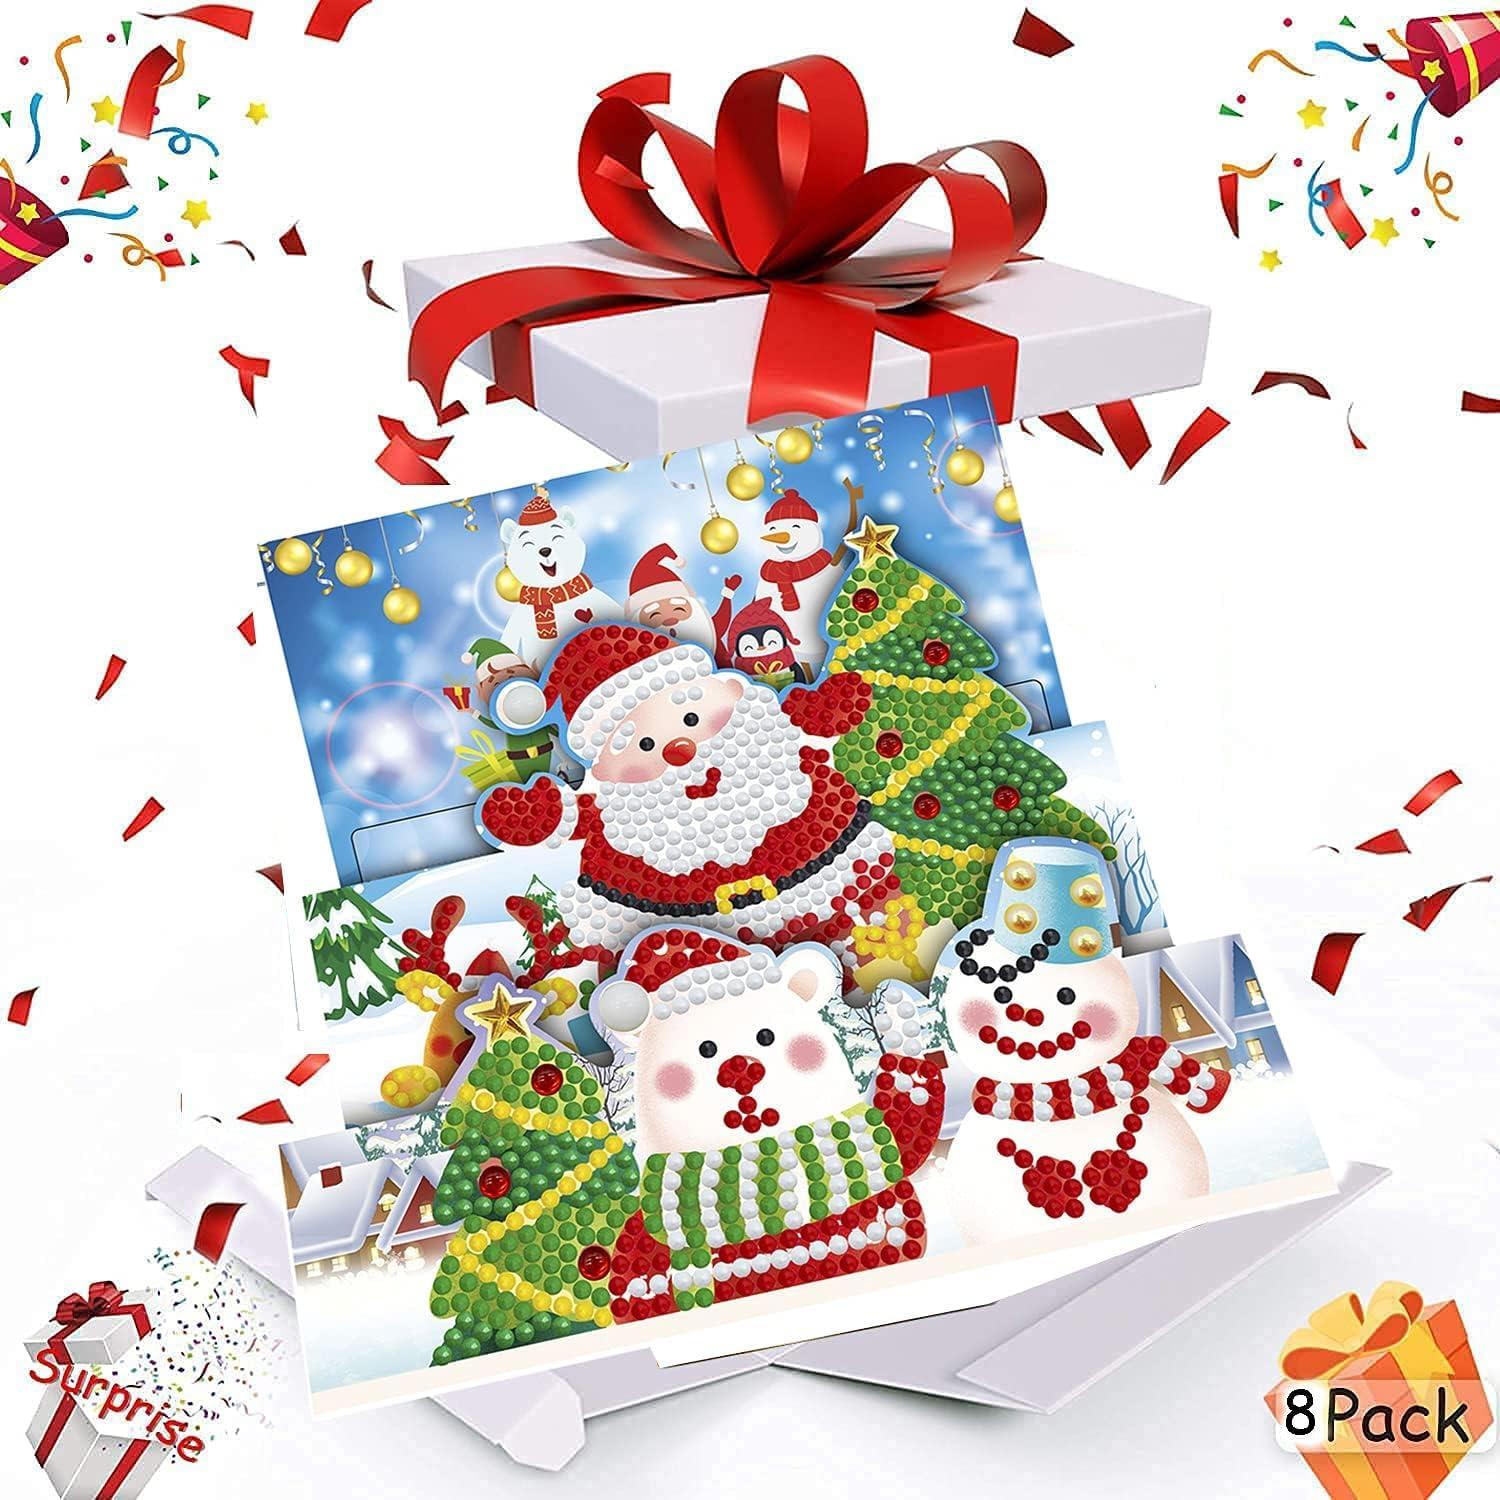 Christmas Cards DIY 5D Diamond Painting Car Number Kits for Kids & Adults, 8Pcs Party Full Drill Design with Envelopes & Tools Included Greeting Stickers Embroidery Cross Stitch Gift (Christmas) 2